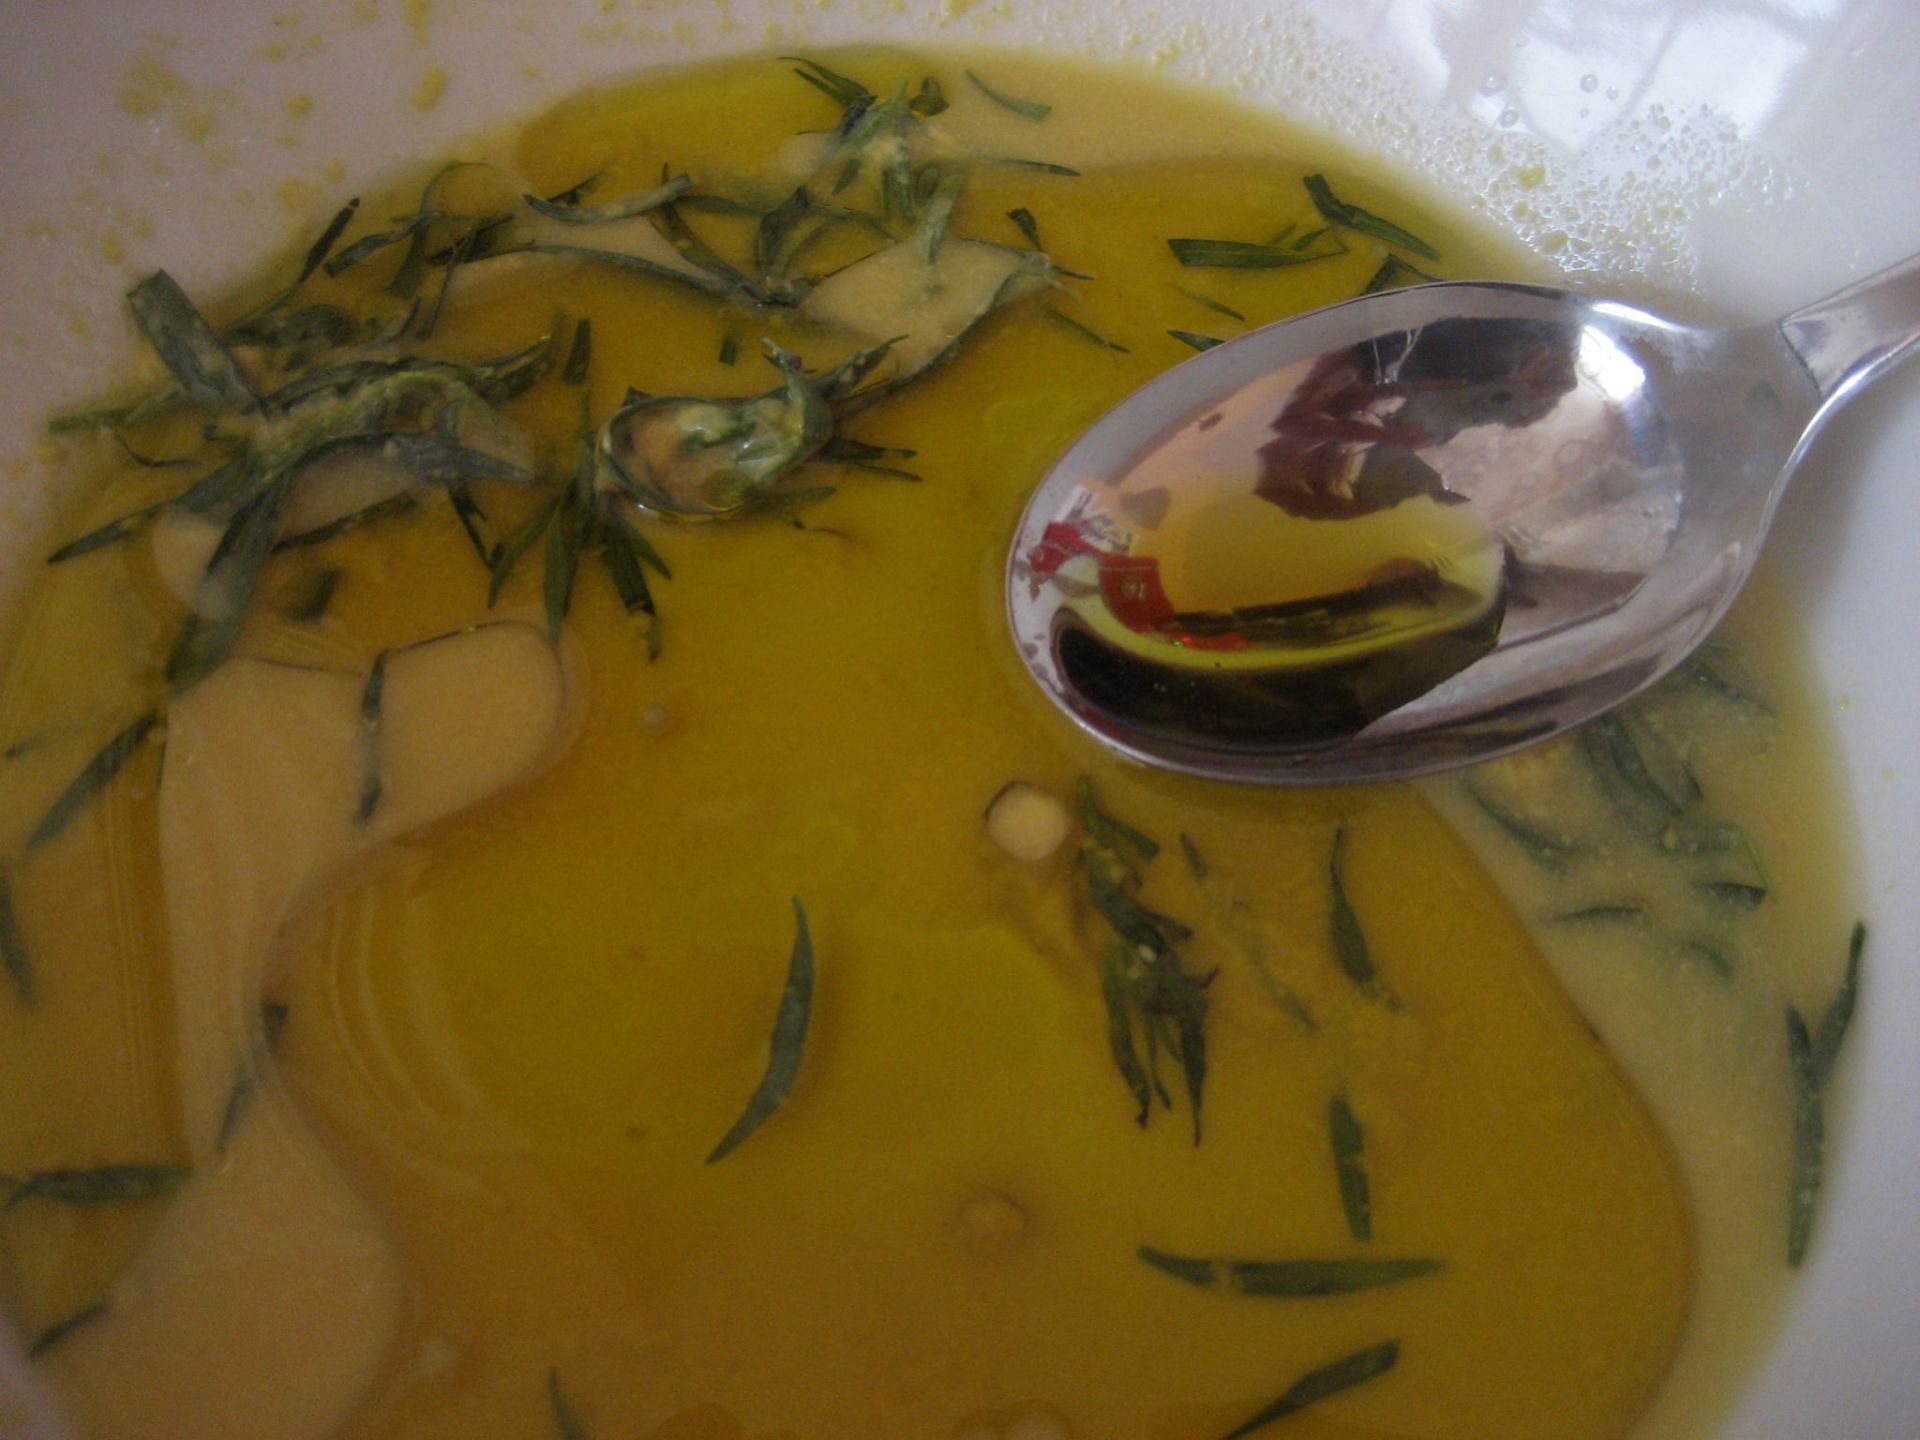 Tarragon flavored oil is an excellent addition to salads and soups (Image via Flickr @kattebelletje)